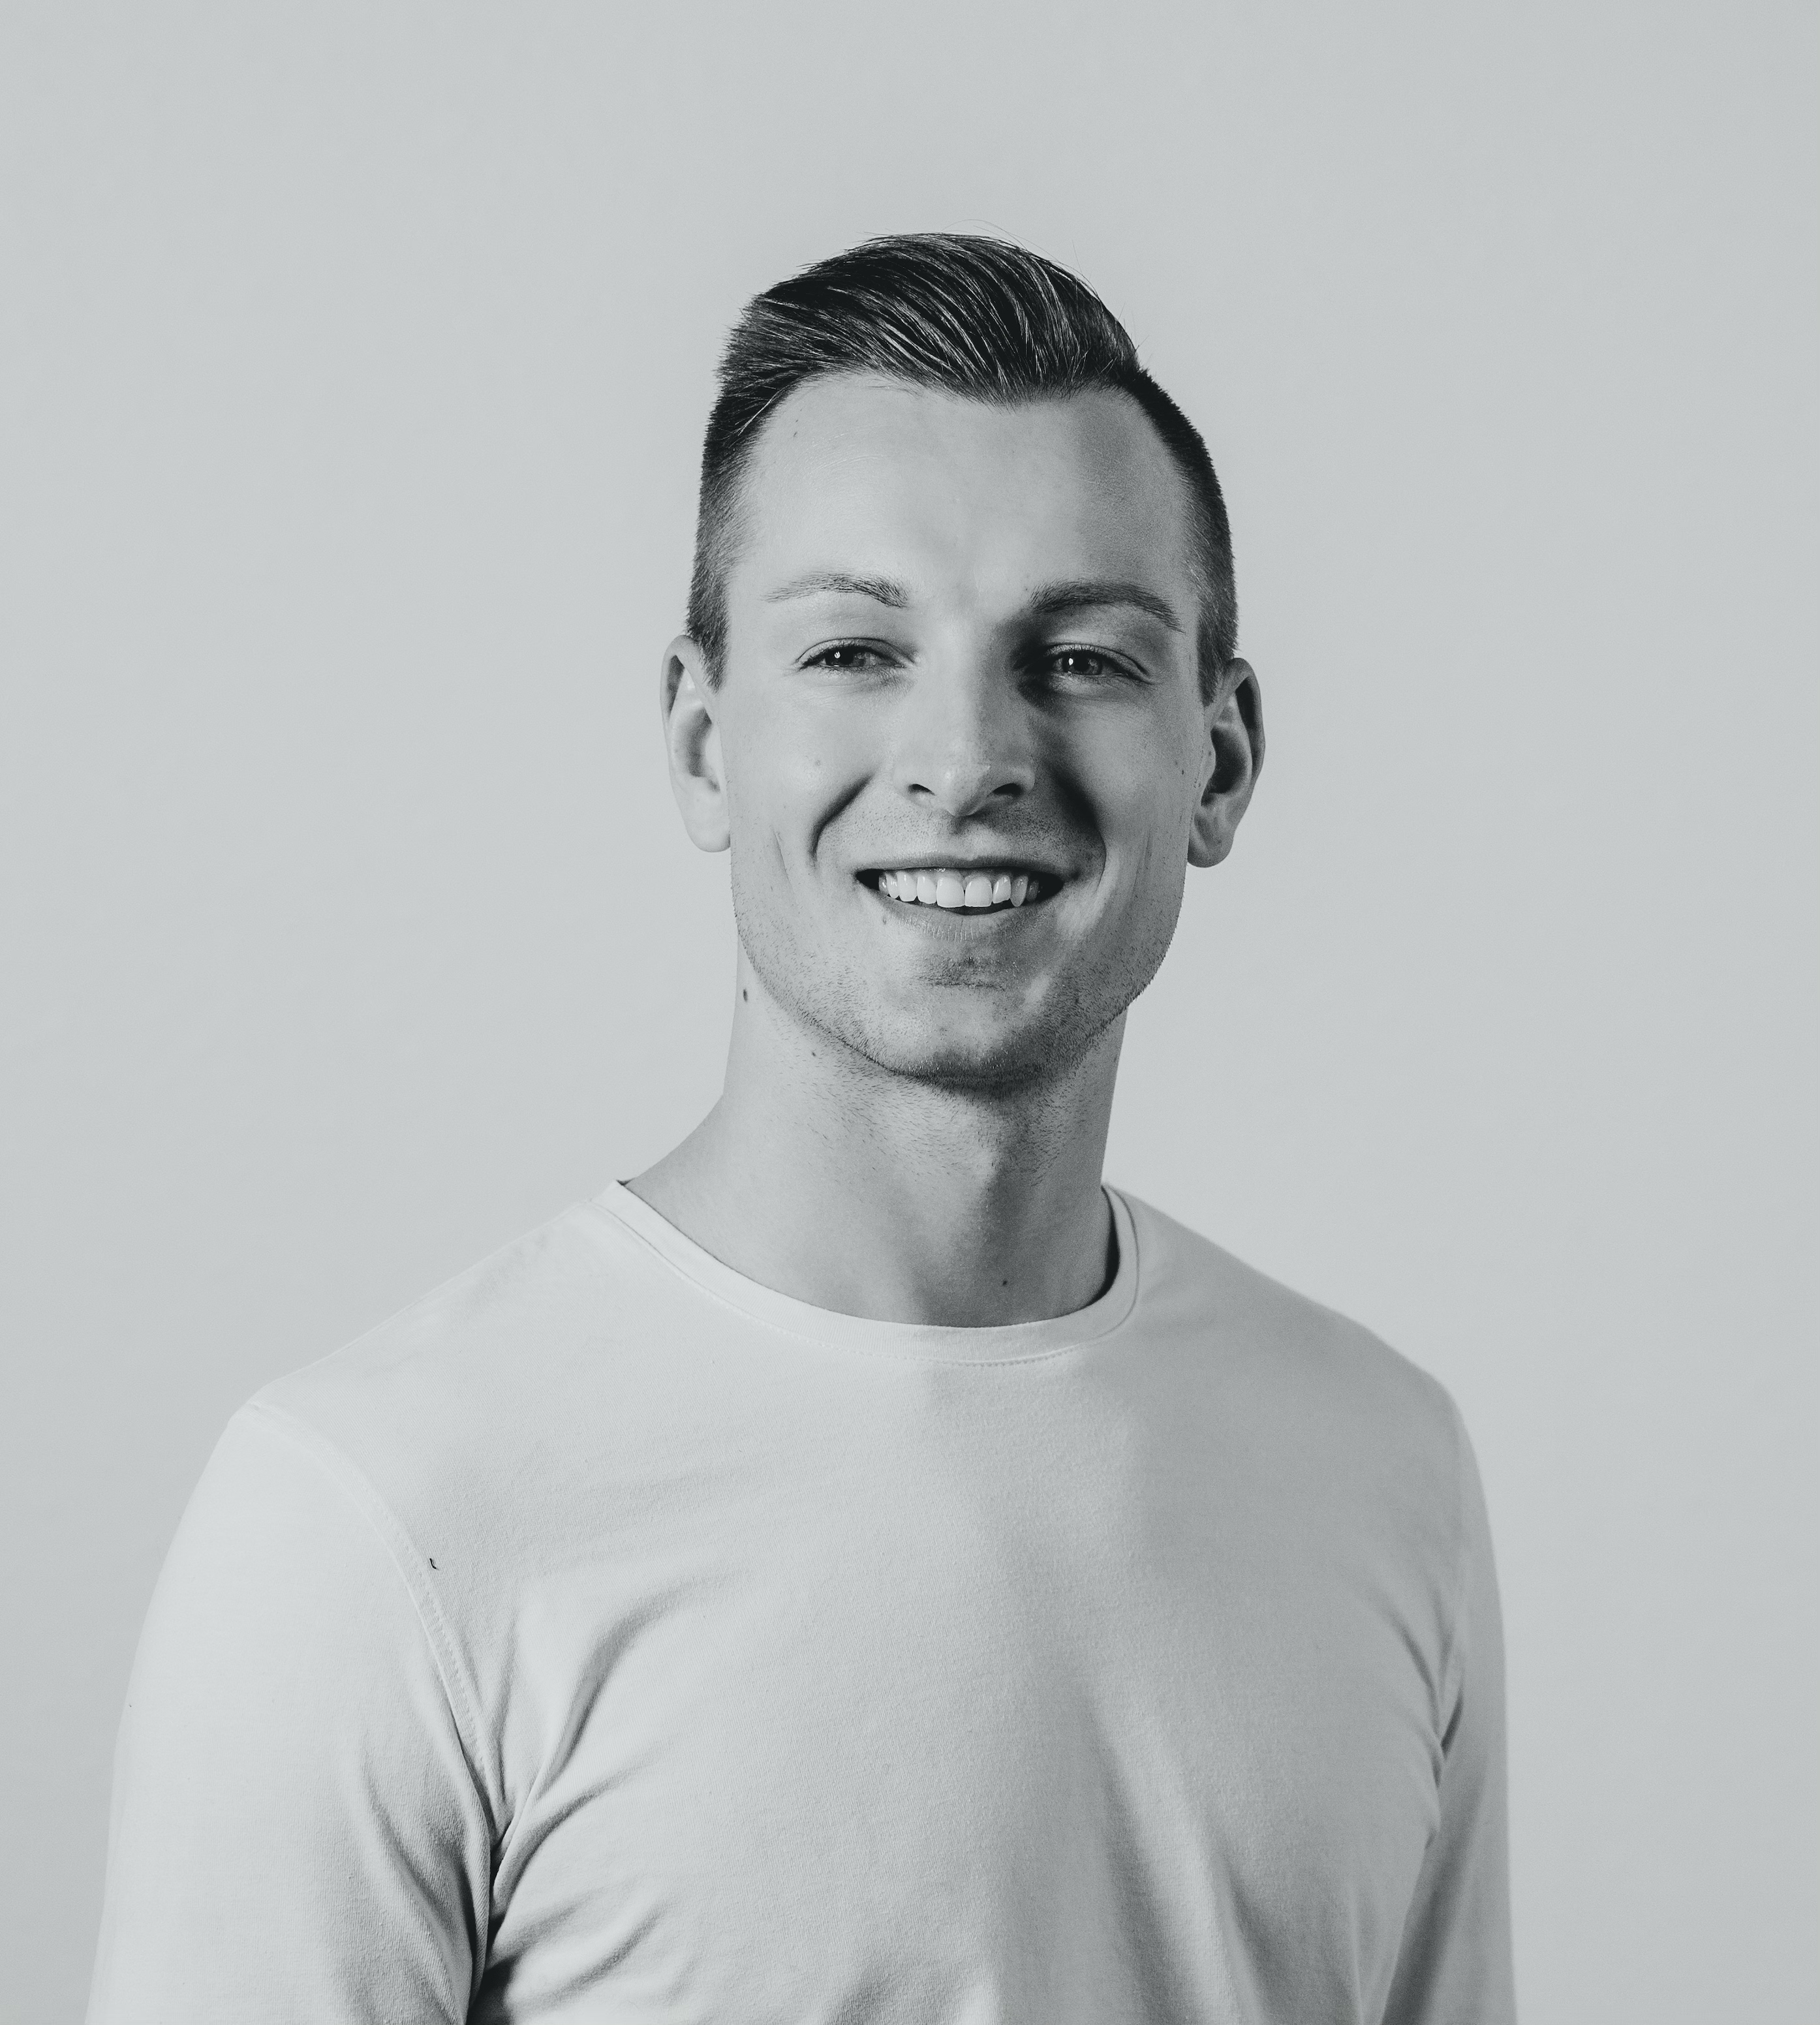 Headshot of Mike Lukas, founder of Online Impact